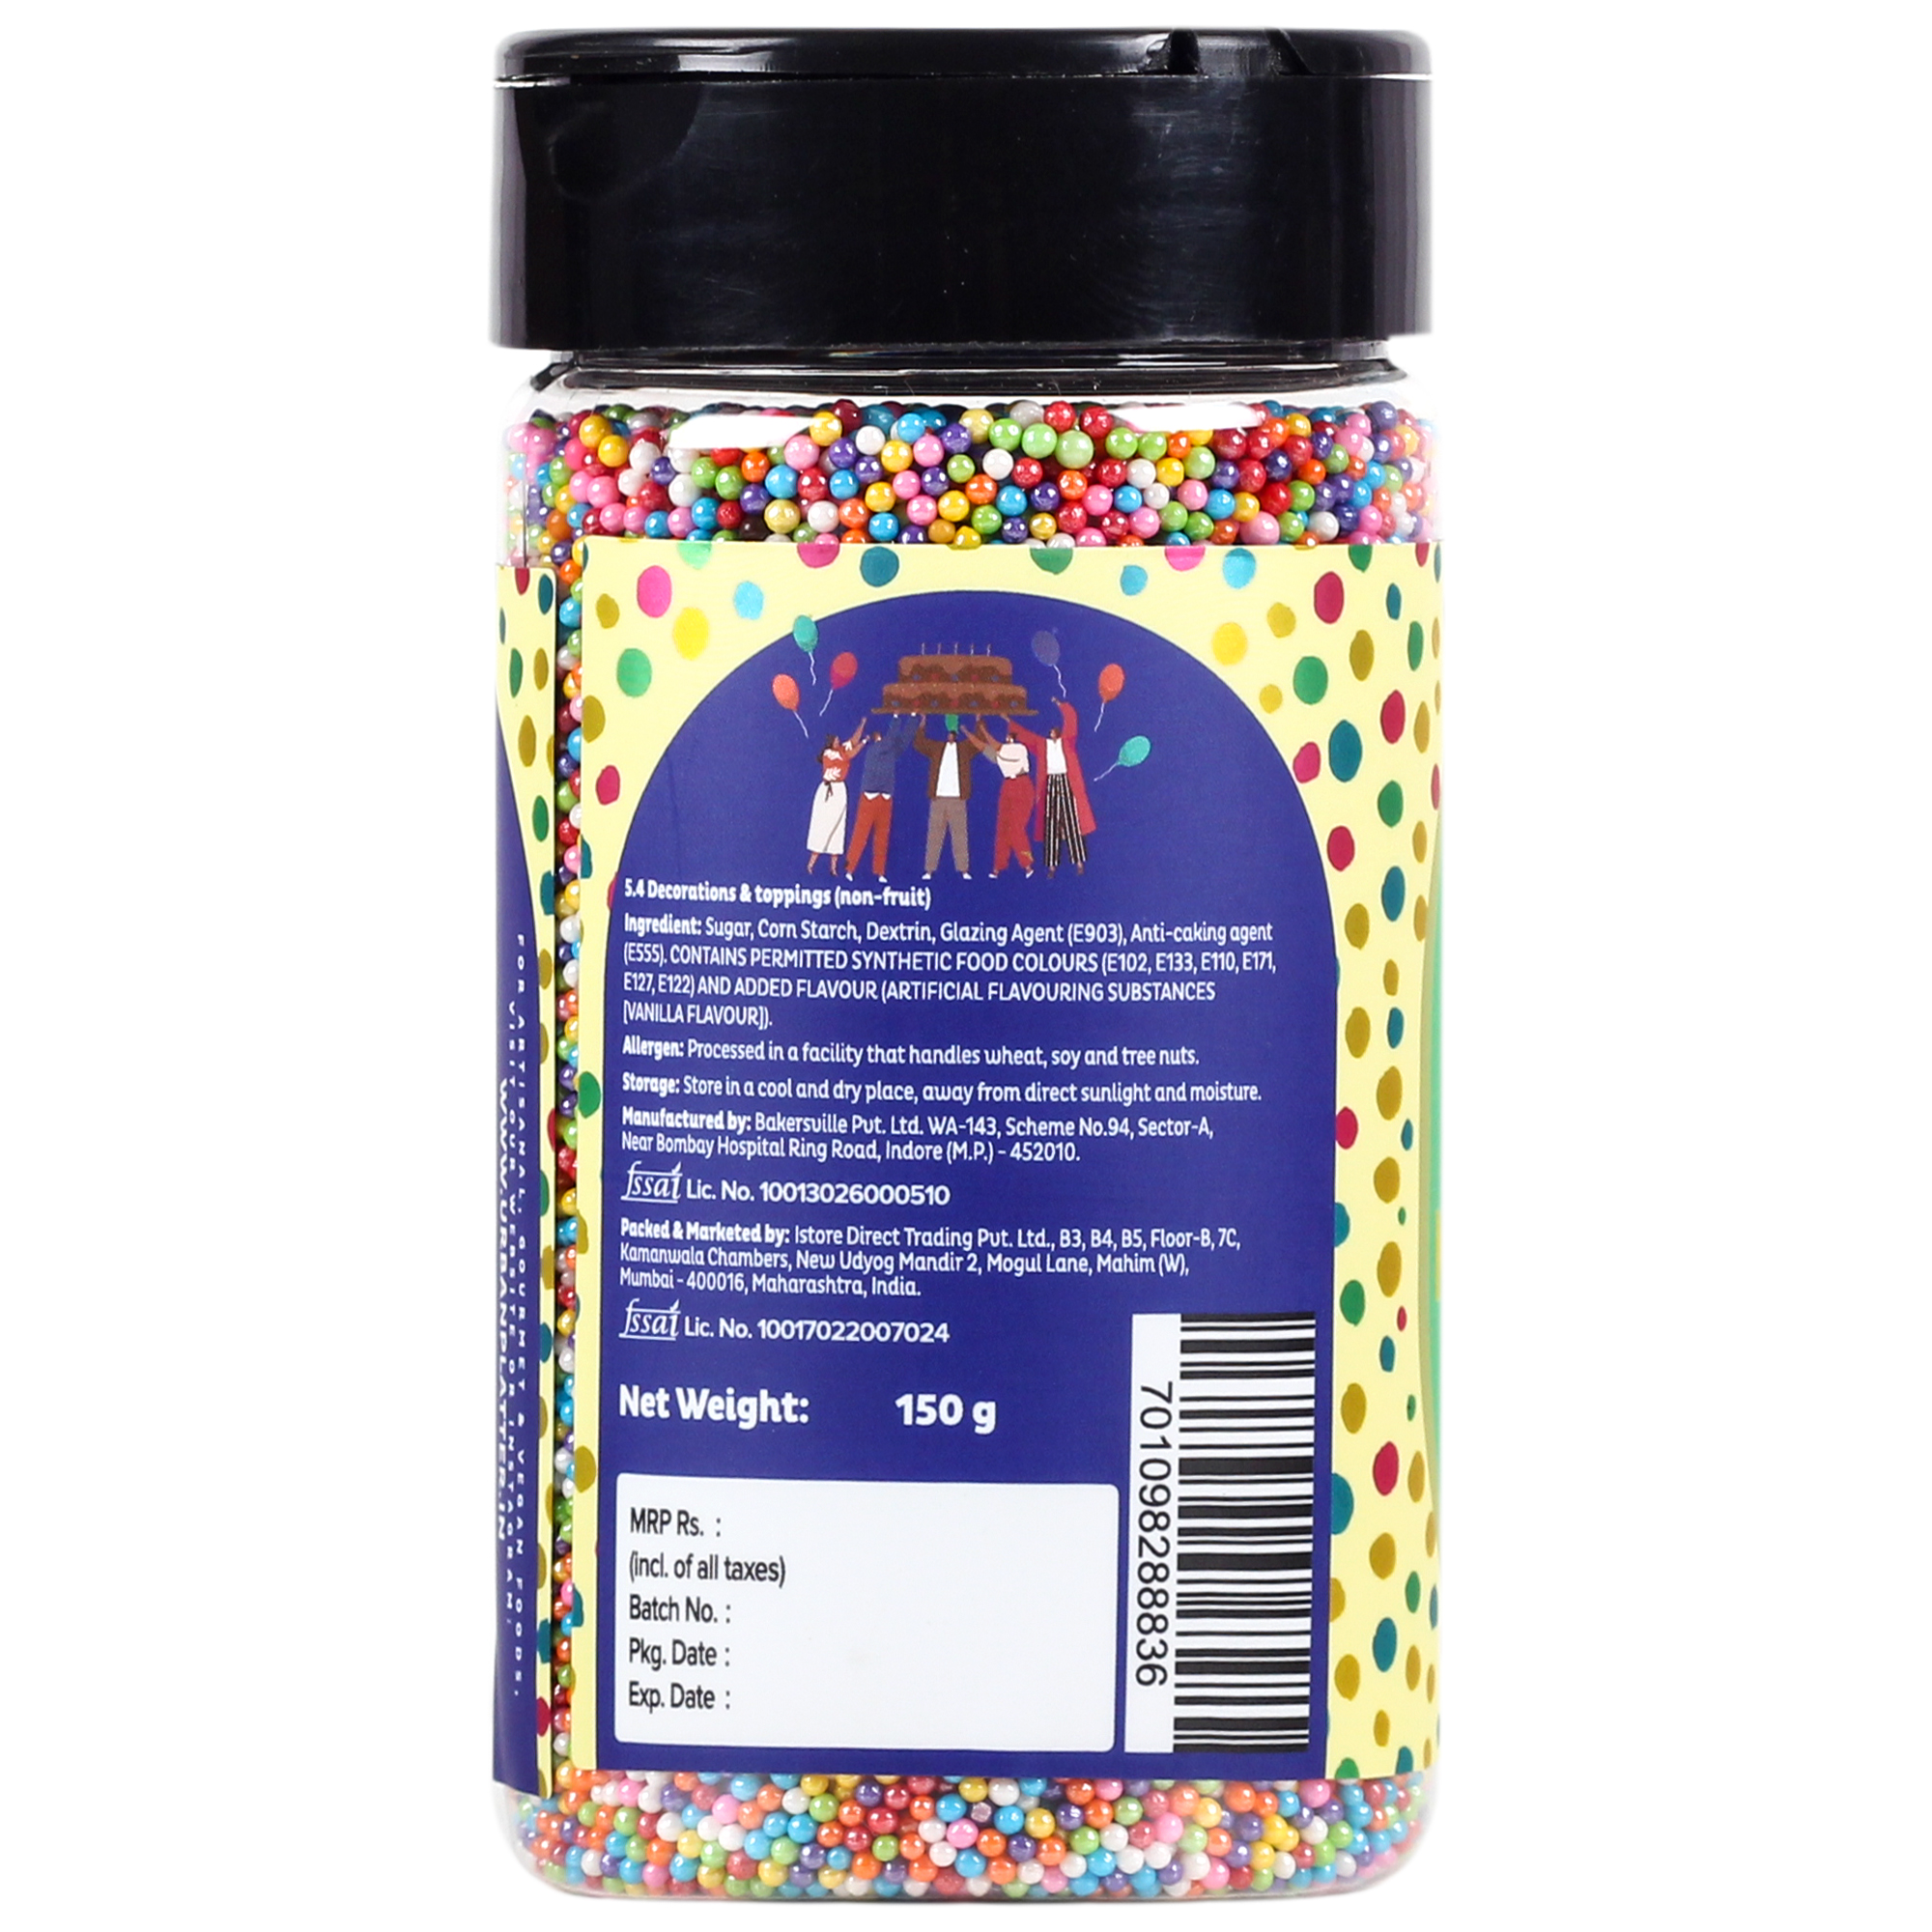 LoveLee Premium Cake Sprinkles  Baking Essentials And Decorations  Buy  Online in South Africa  takealotcom